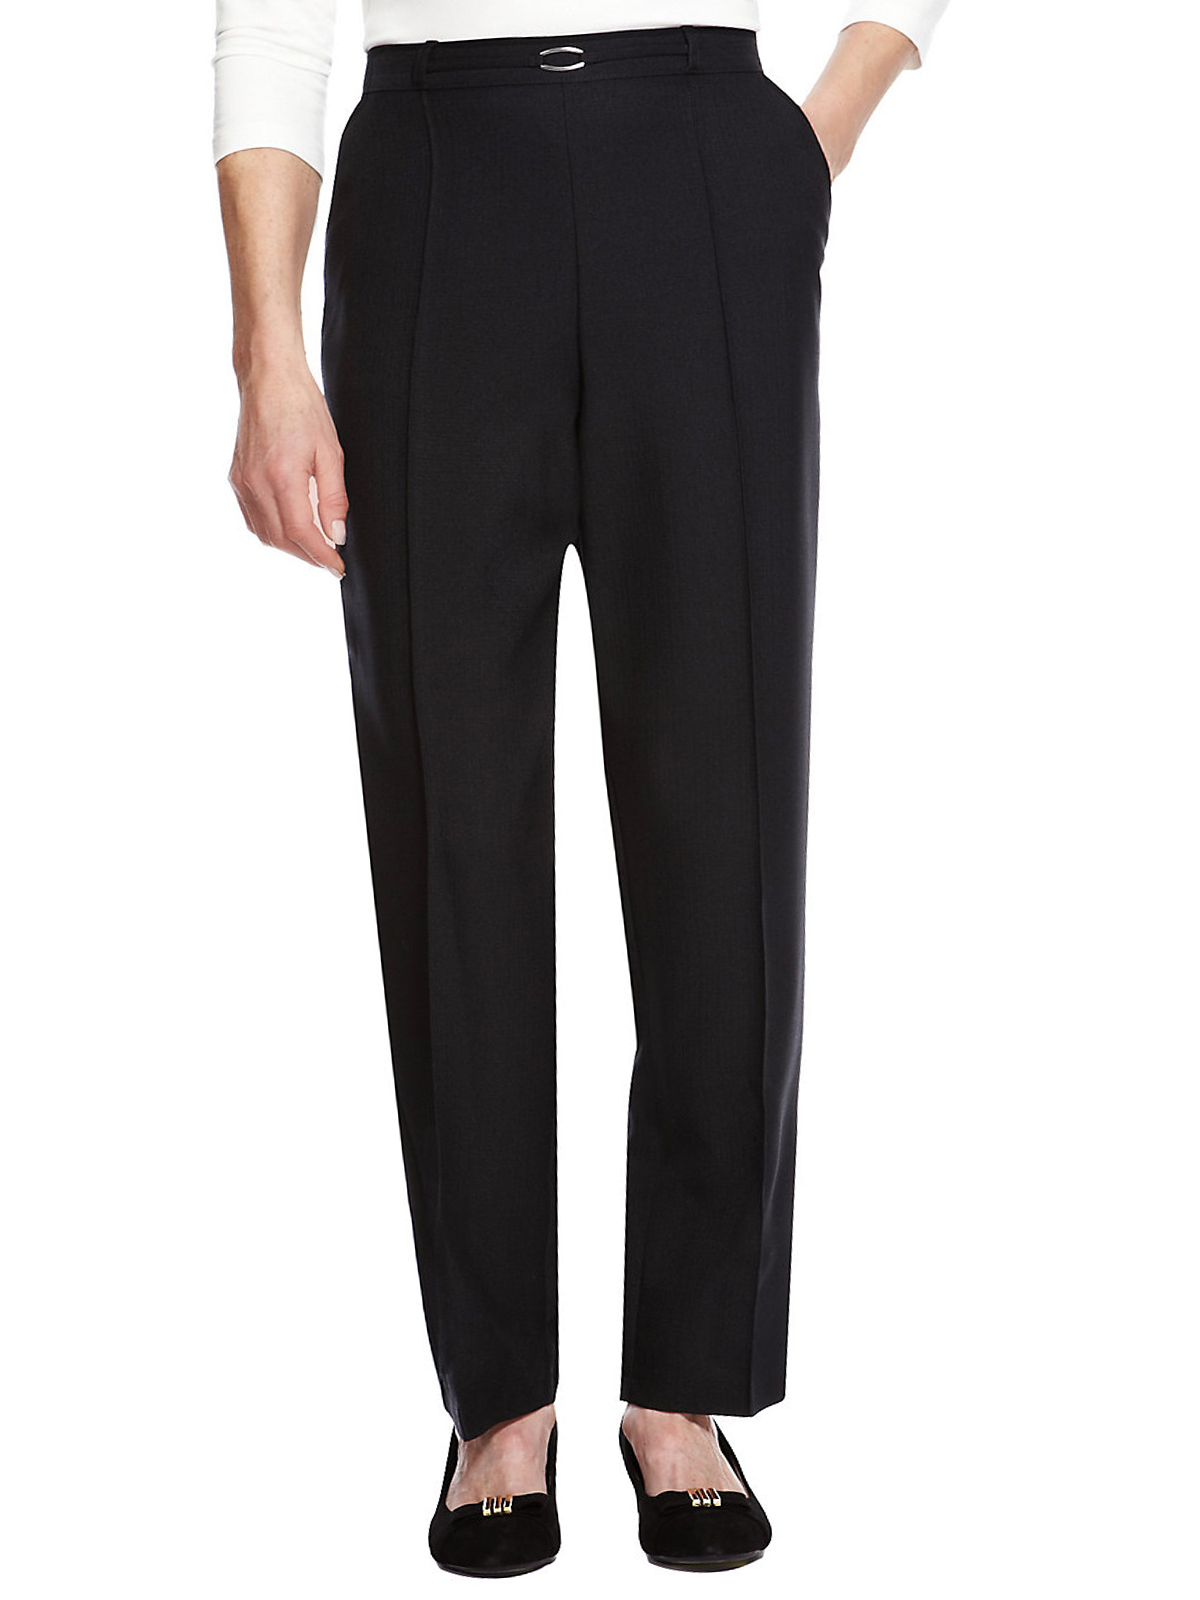 Marks and Spencer - - M&5 BLACK Pull On Trousers - Size 8 to 24